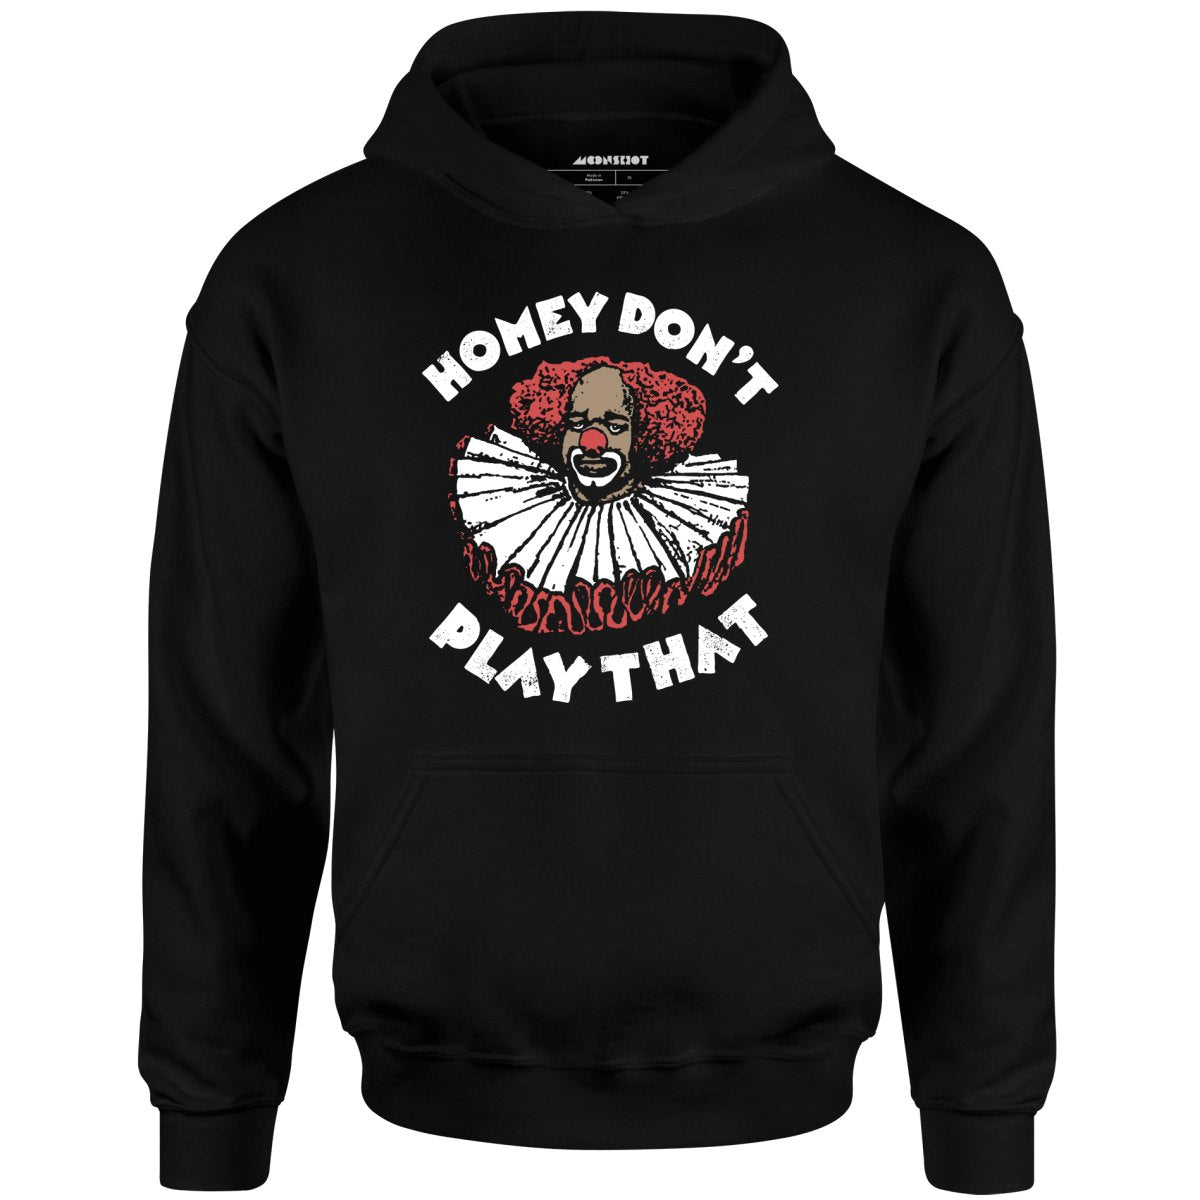 Homey Don't Play That - Unisex Hoodie